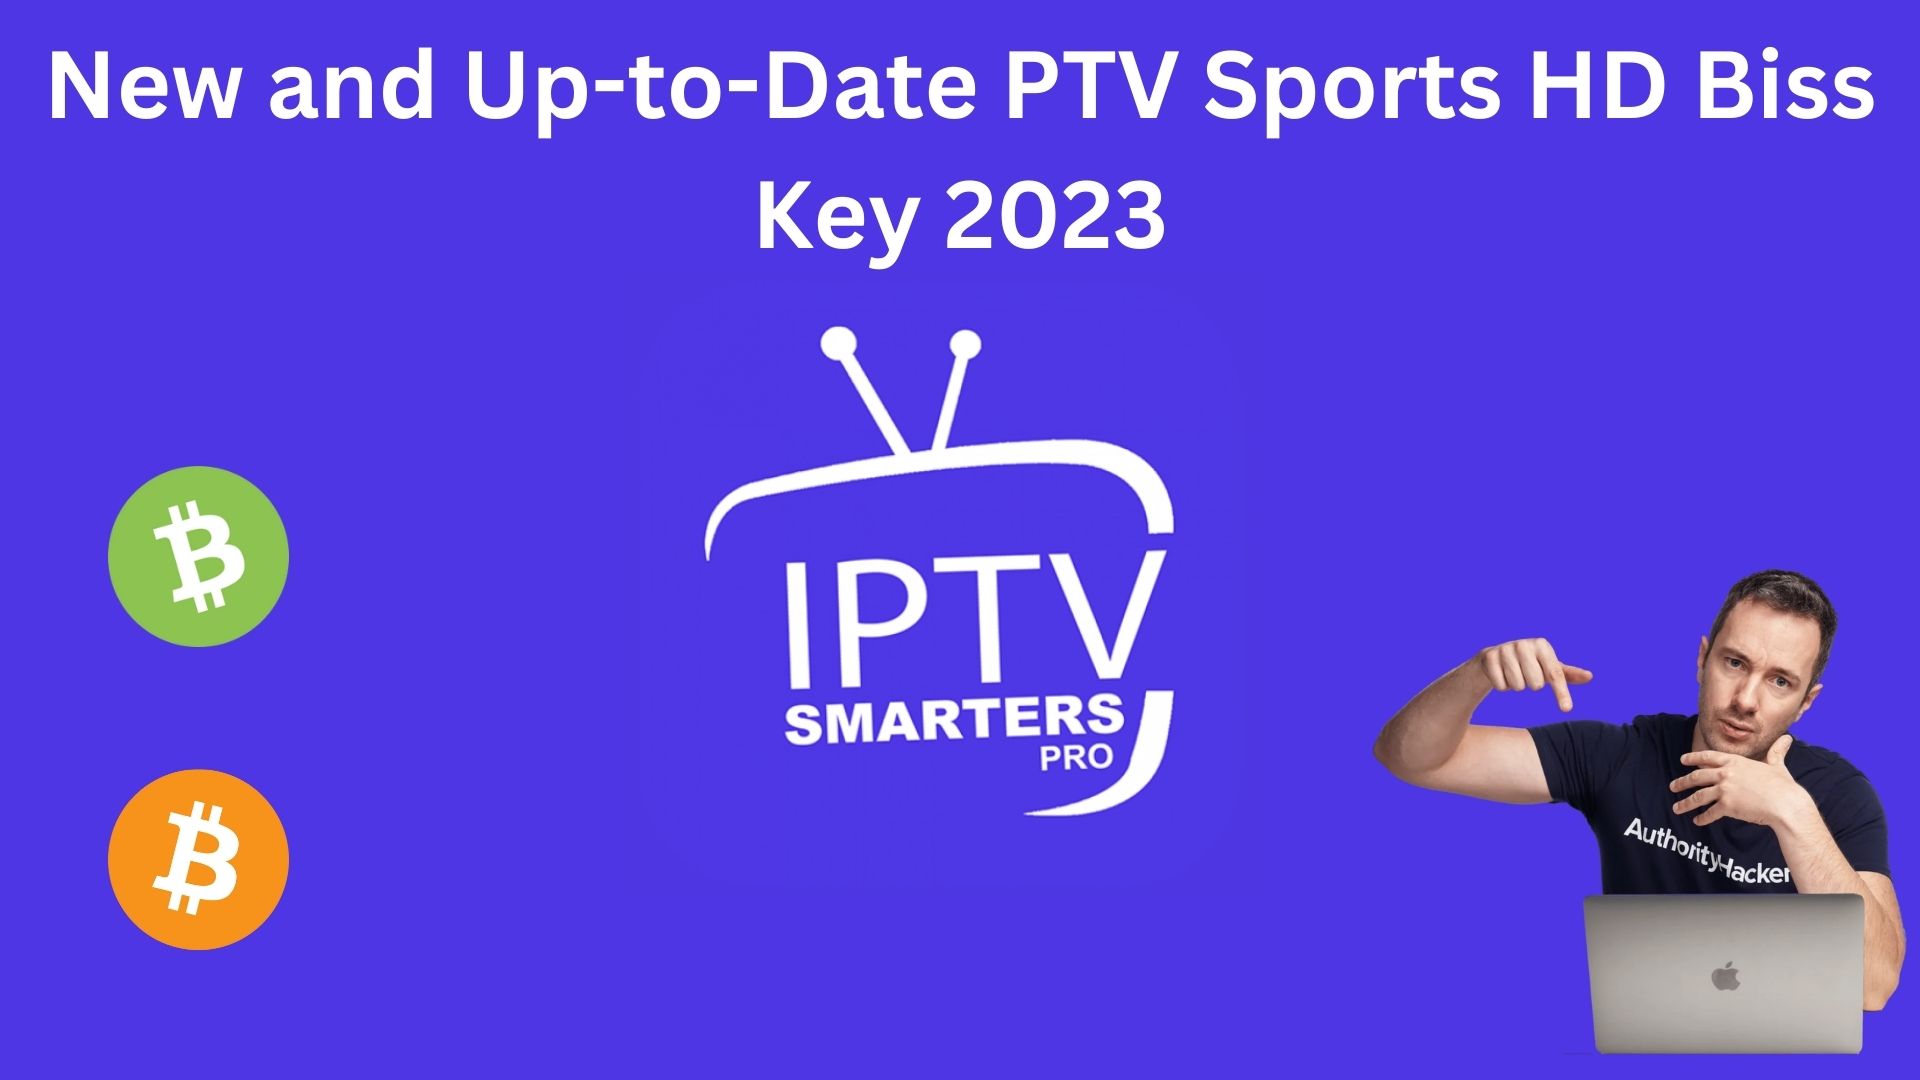 New and UptoDate PTV Sports HD Biss Key 2023